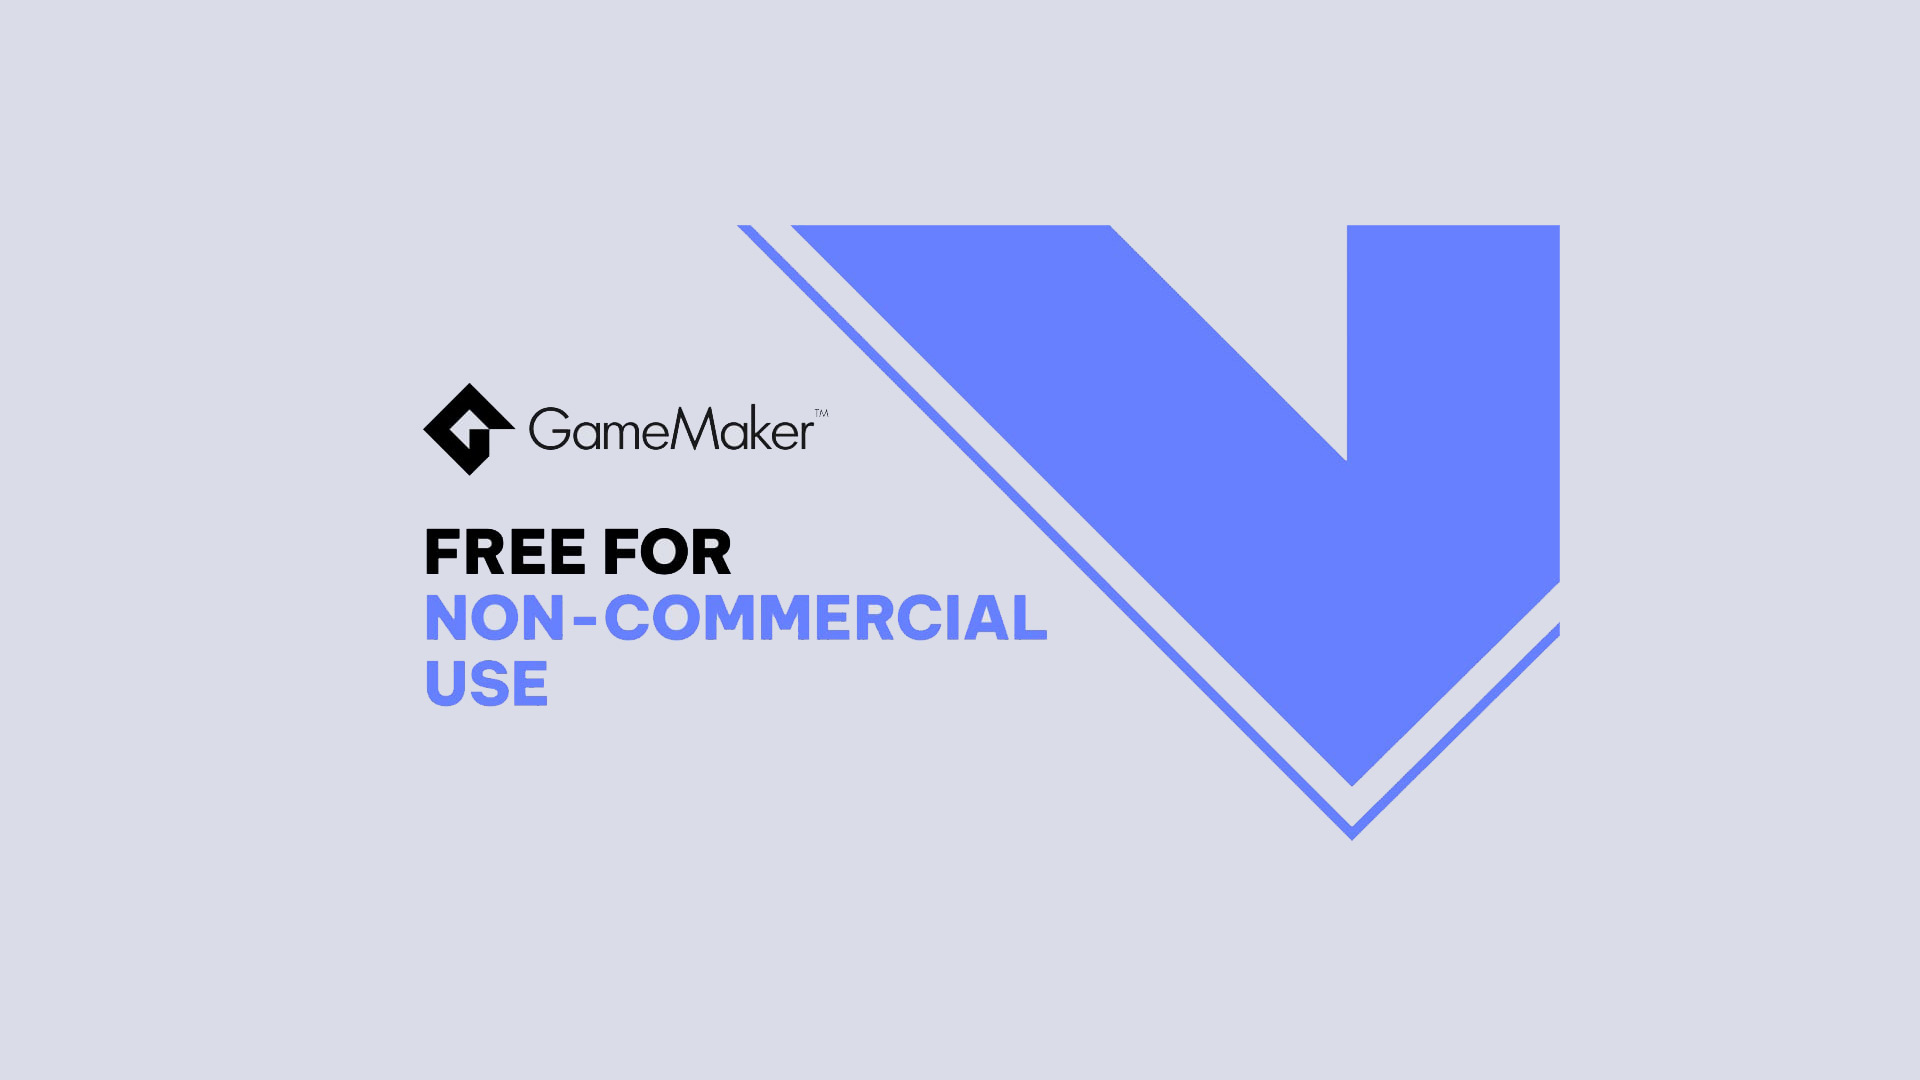 GameMaker will be free for no9n-commercial purposes on all non-console platforms